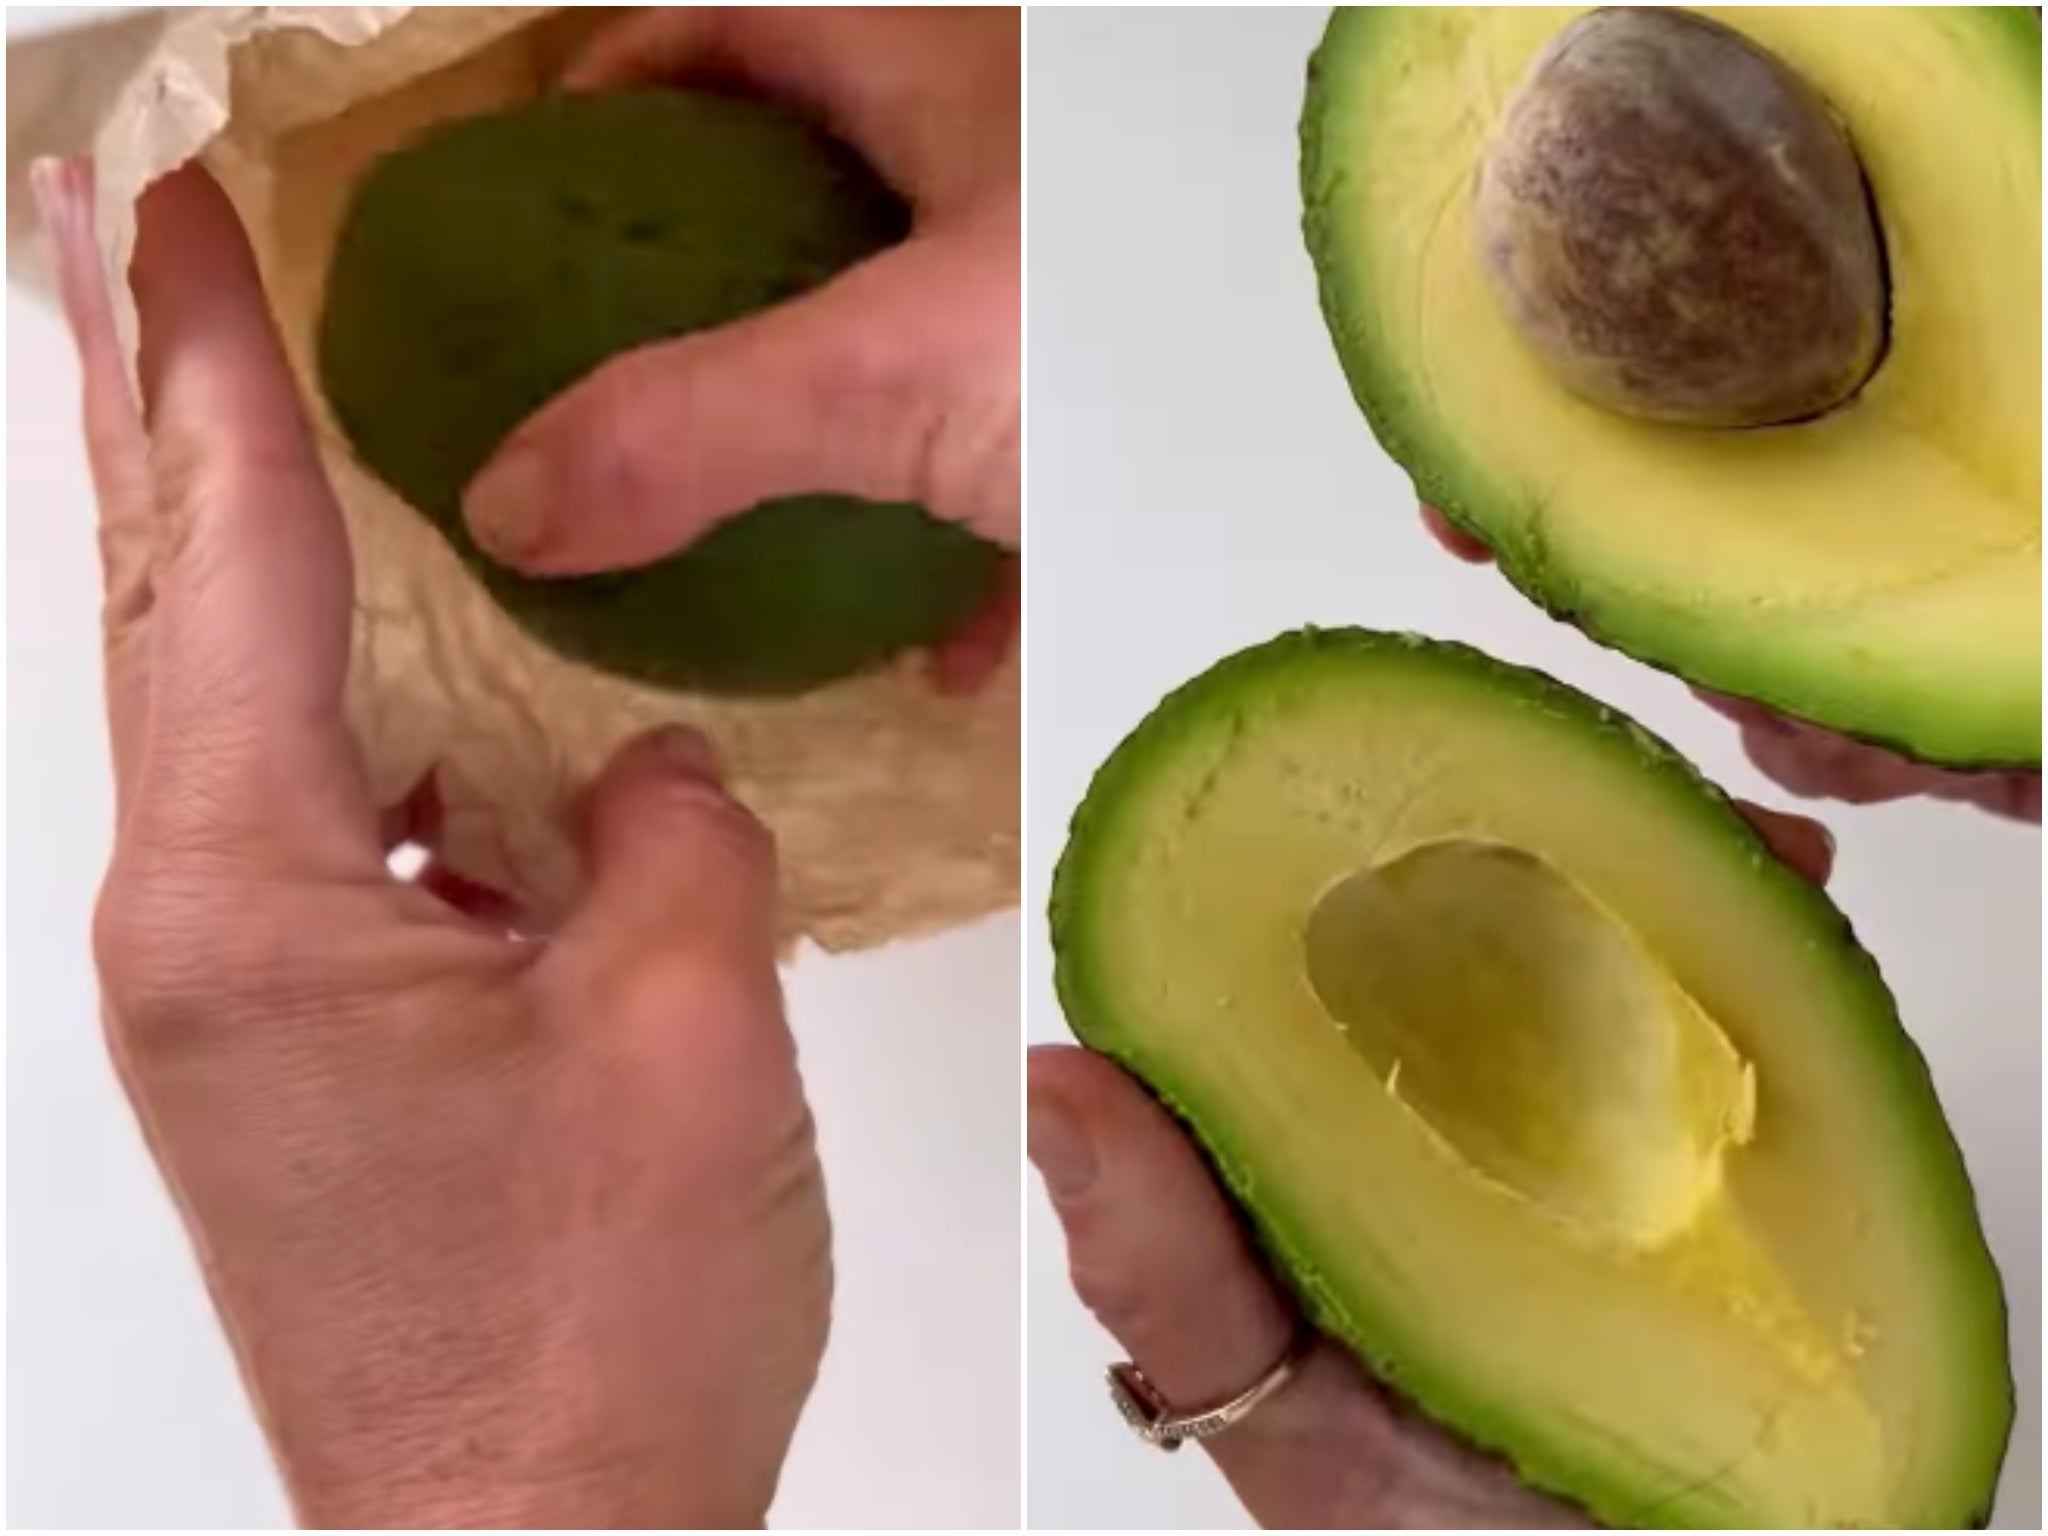 Instagrammer Caroline Groth shows her hack for ripening an avocado quickly